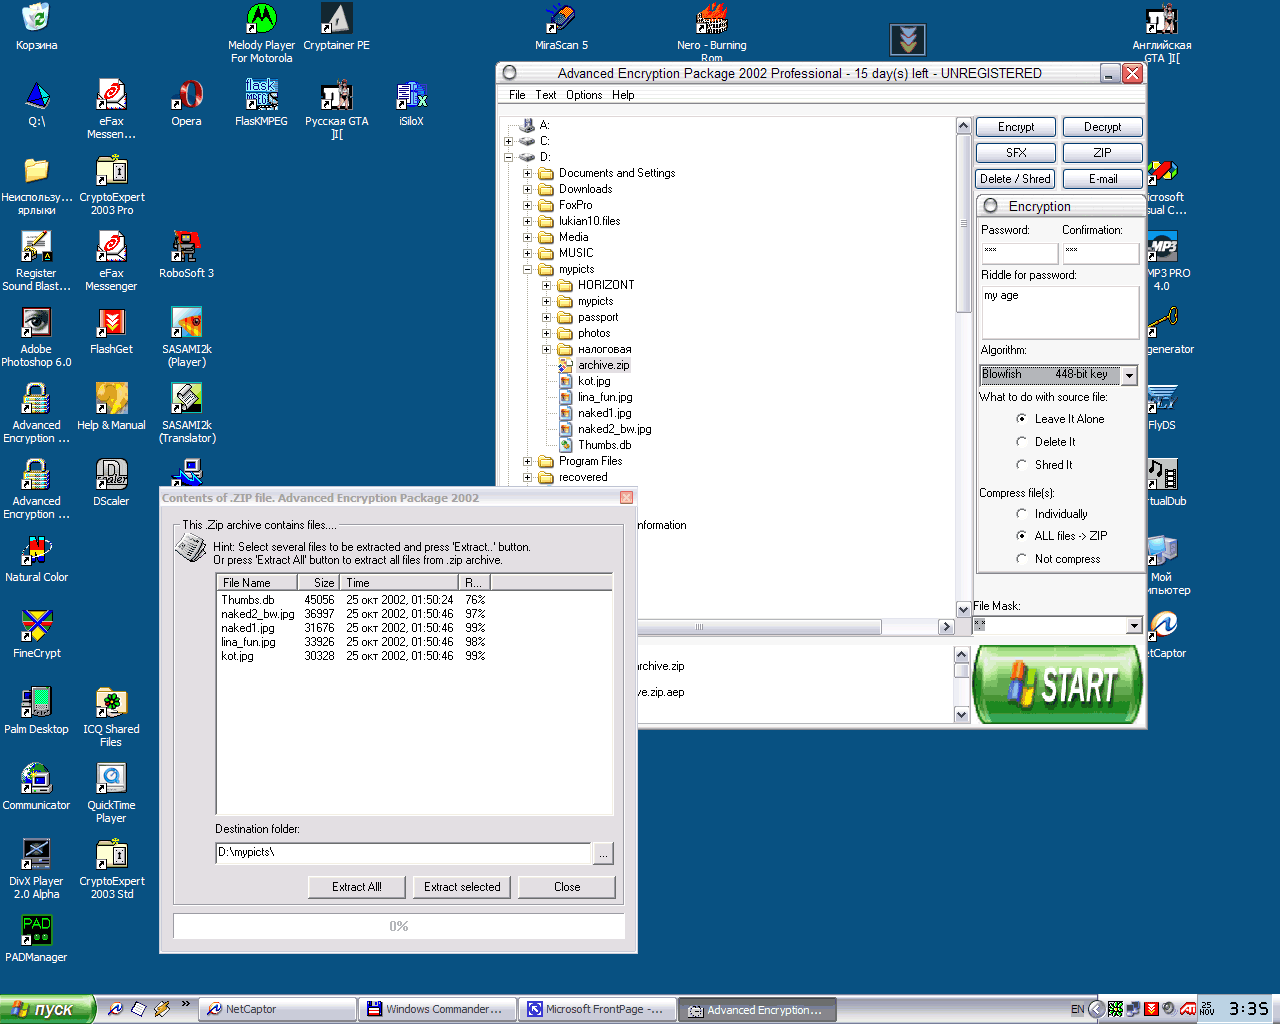 Advanced Encryption Package 2002